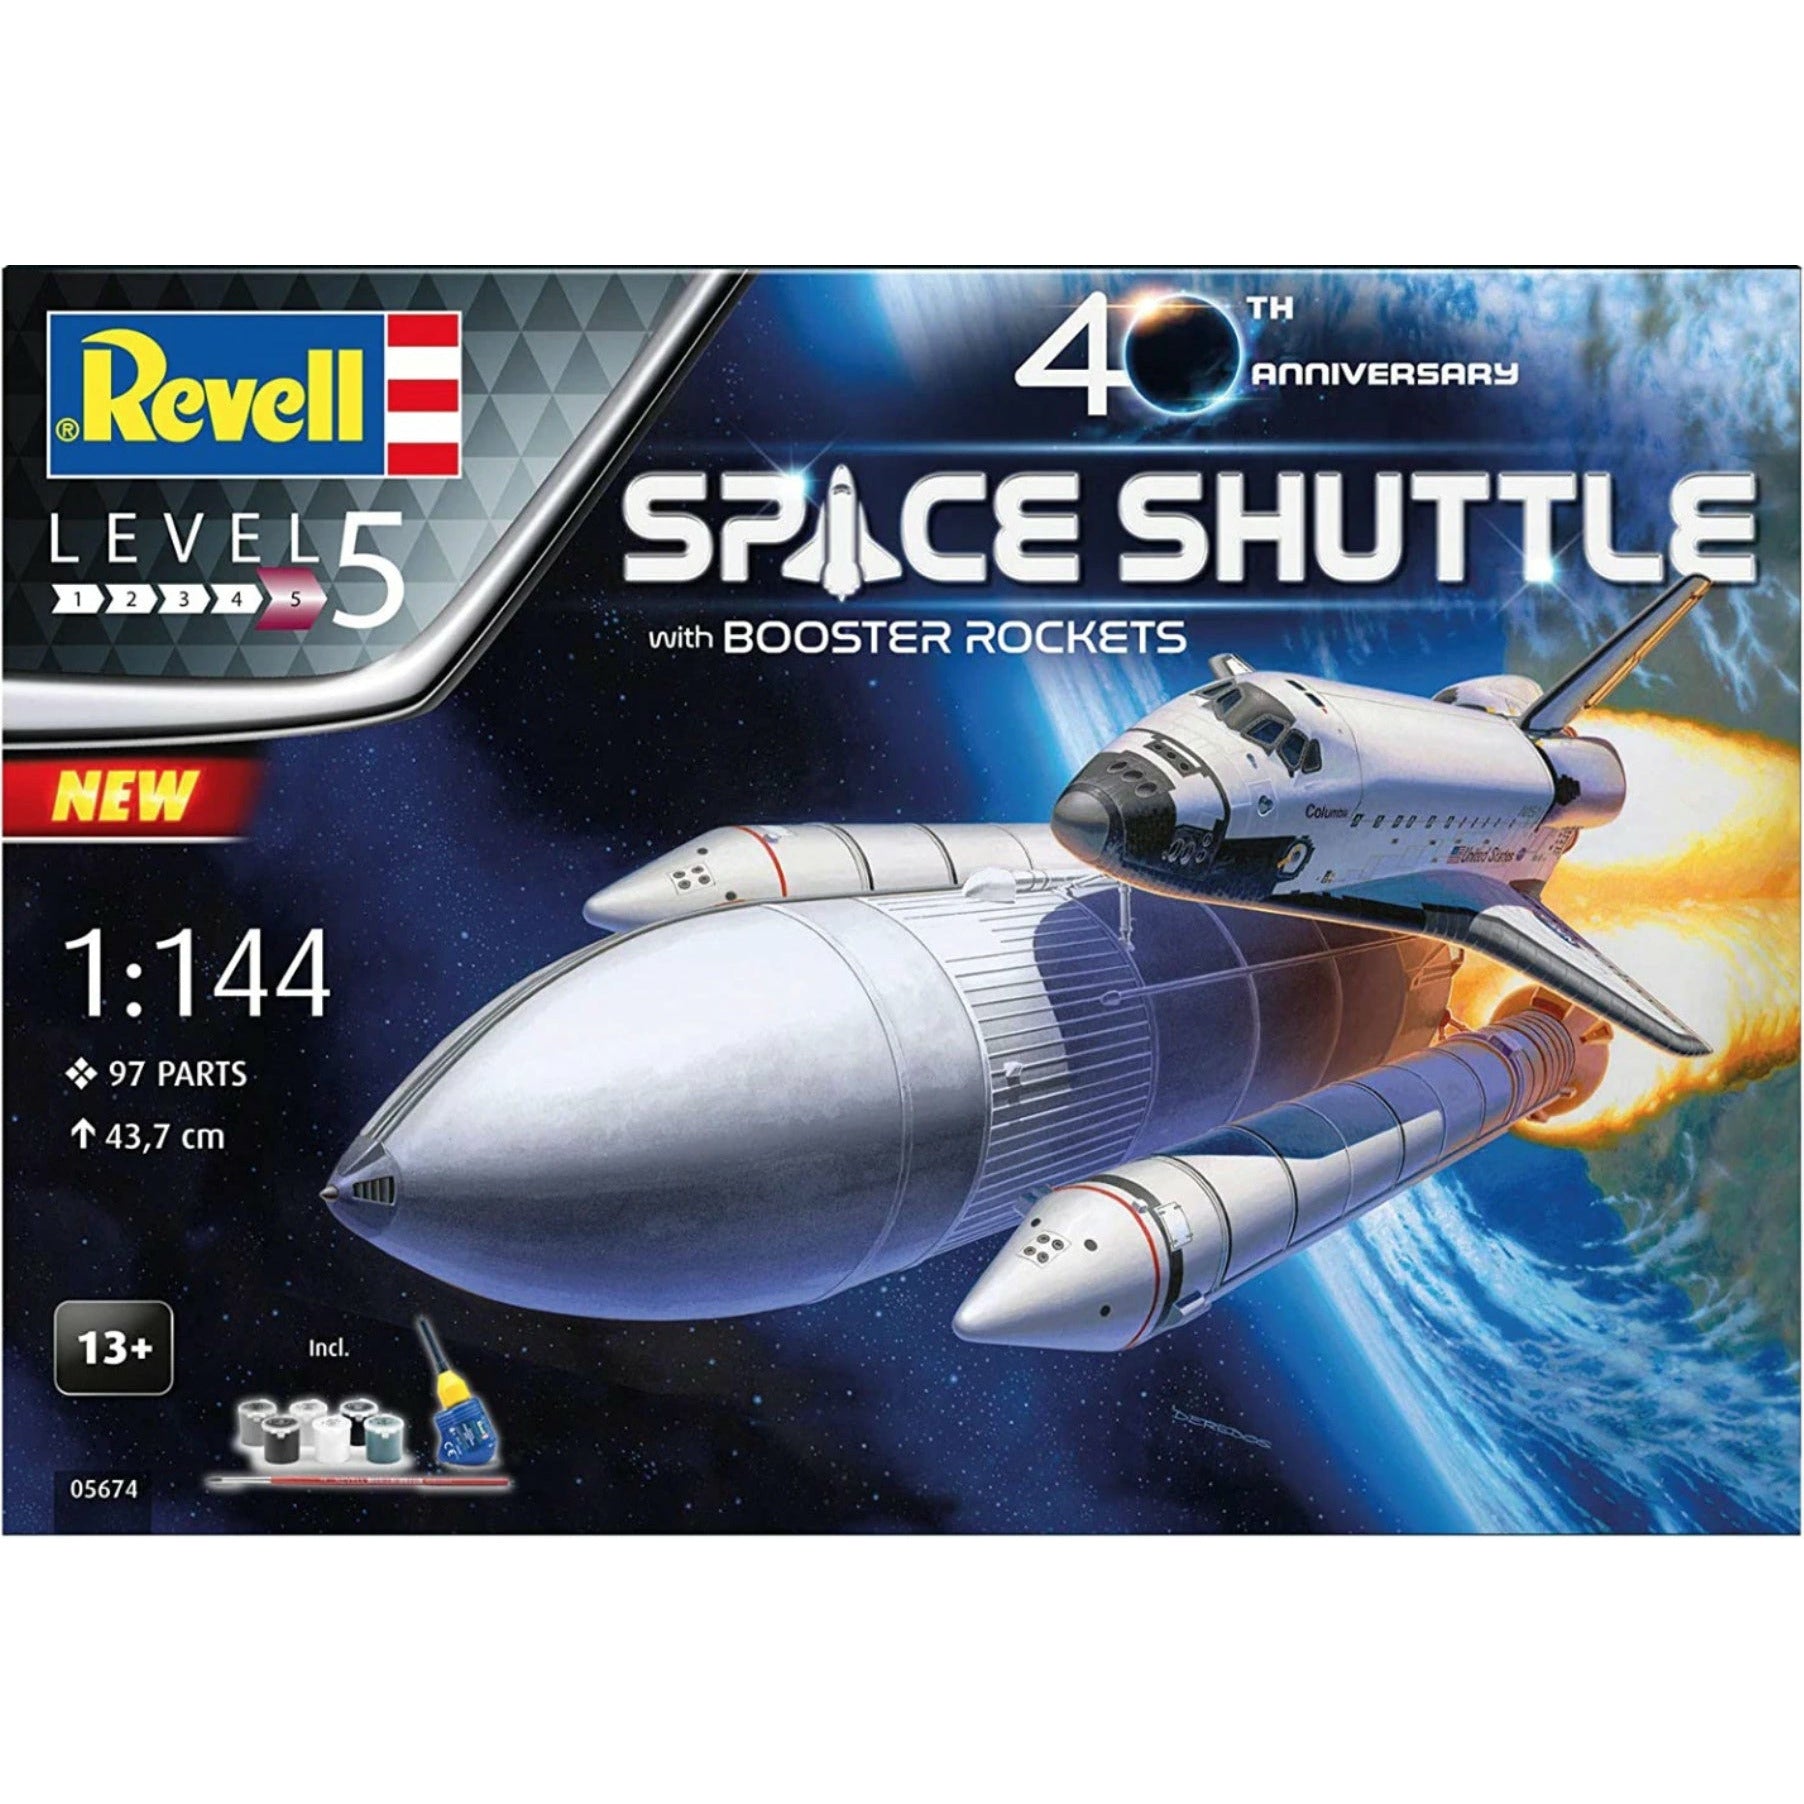 Space Shuttle with Booster Rockets - 40th Anniversary 1/144 #05674 by Revell